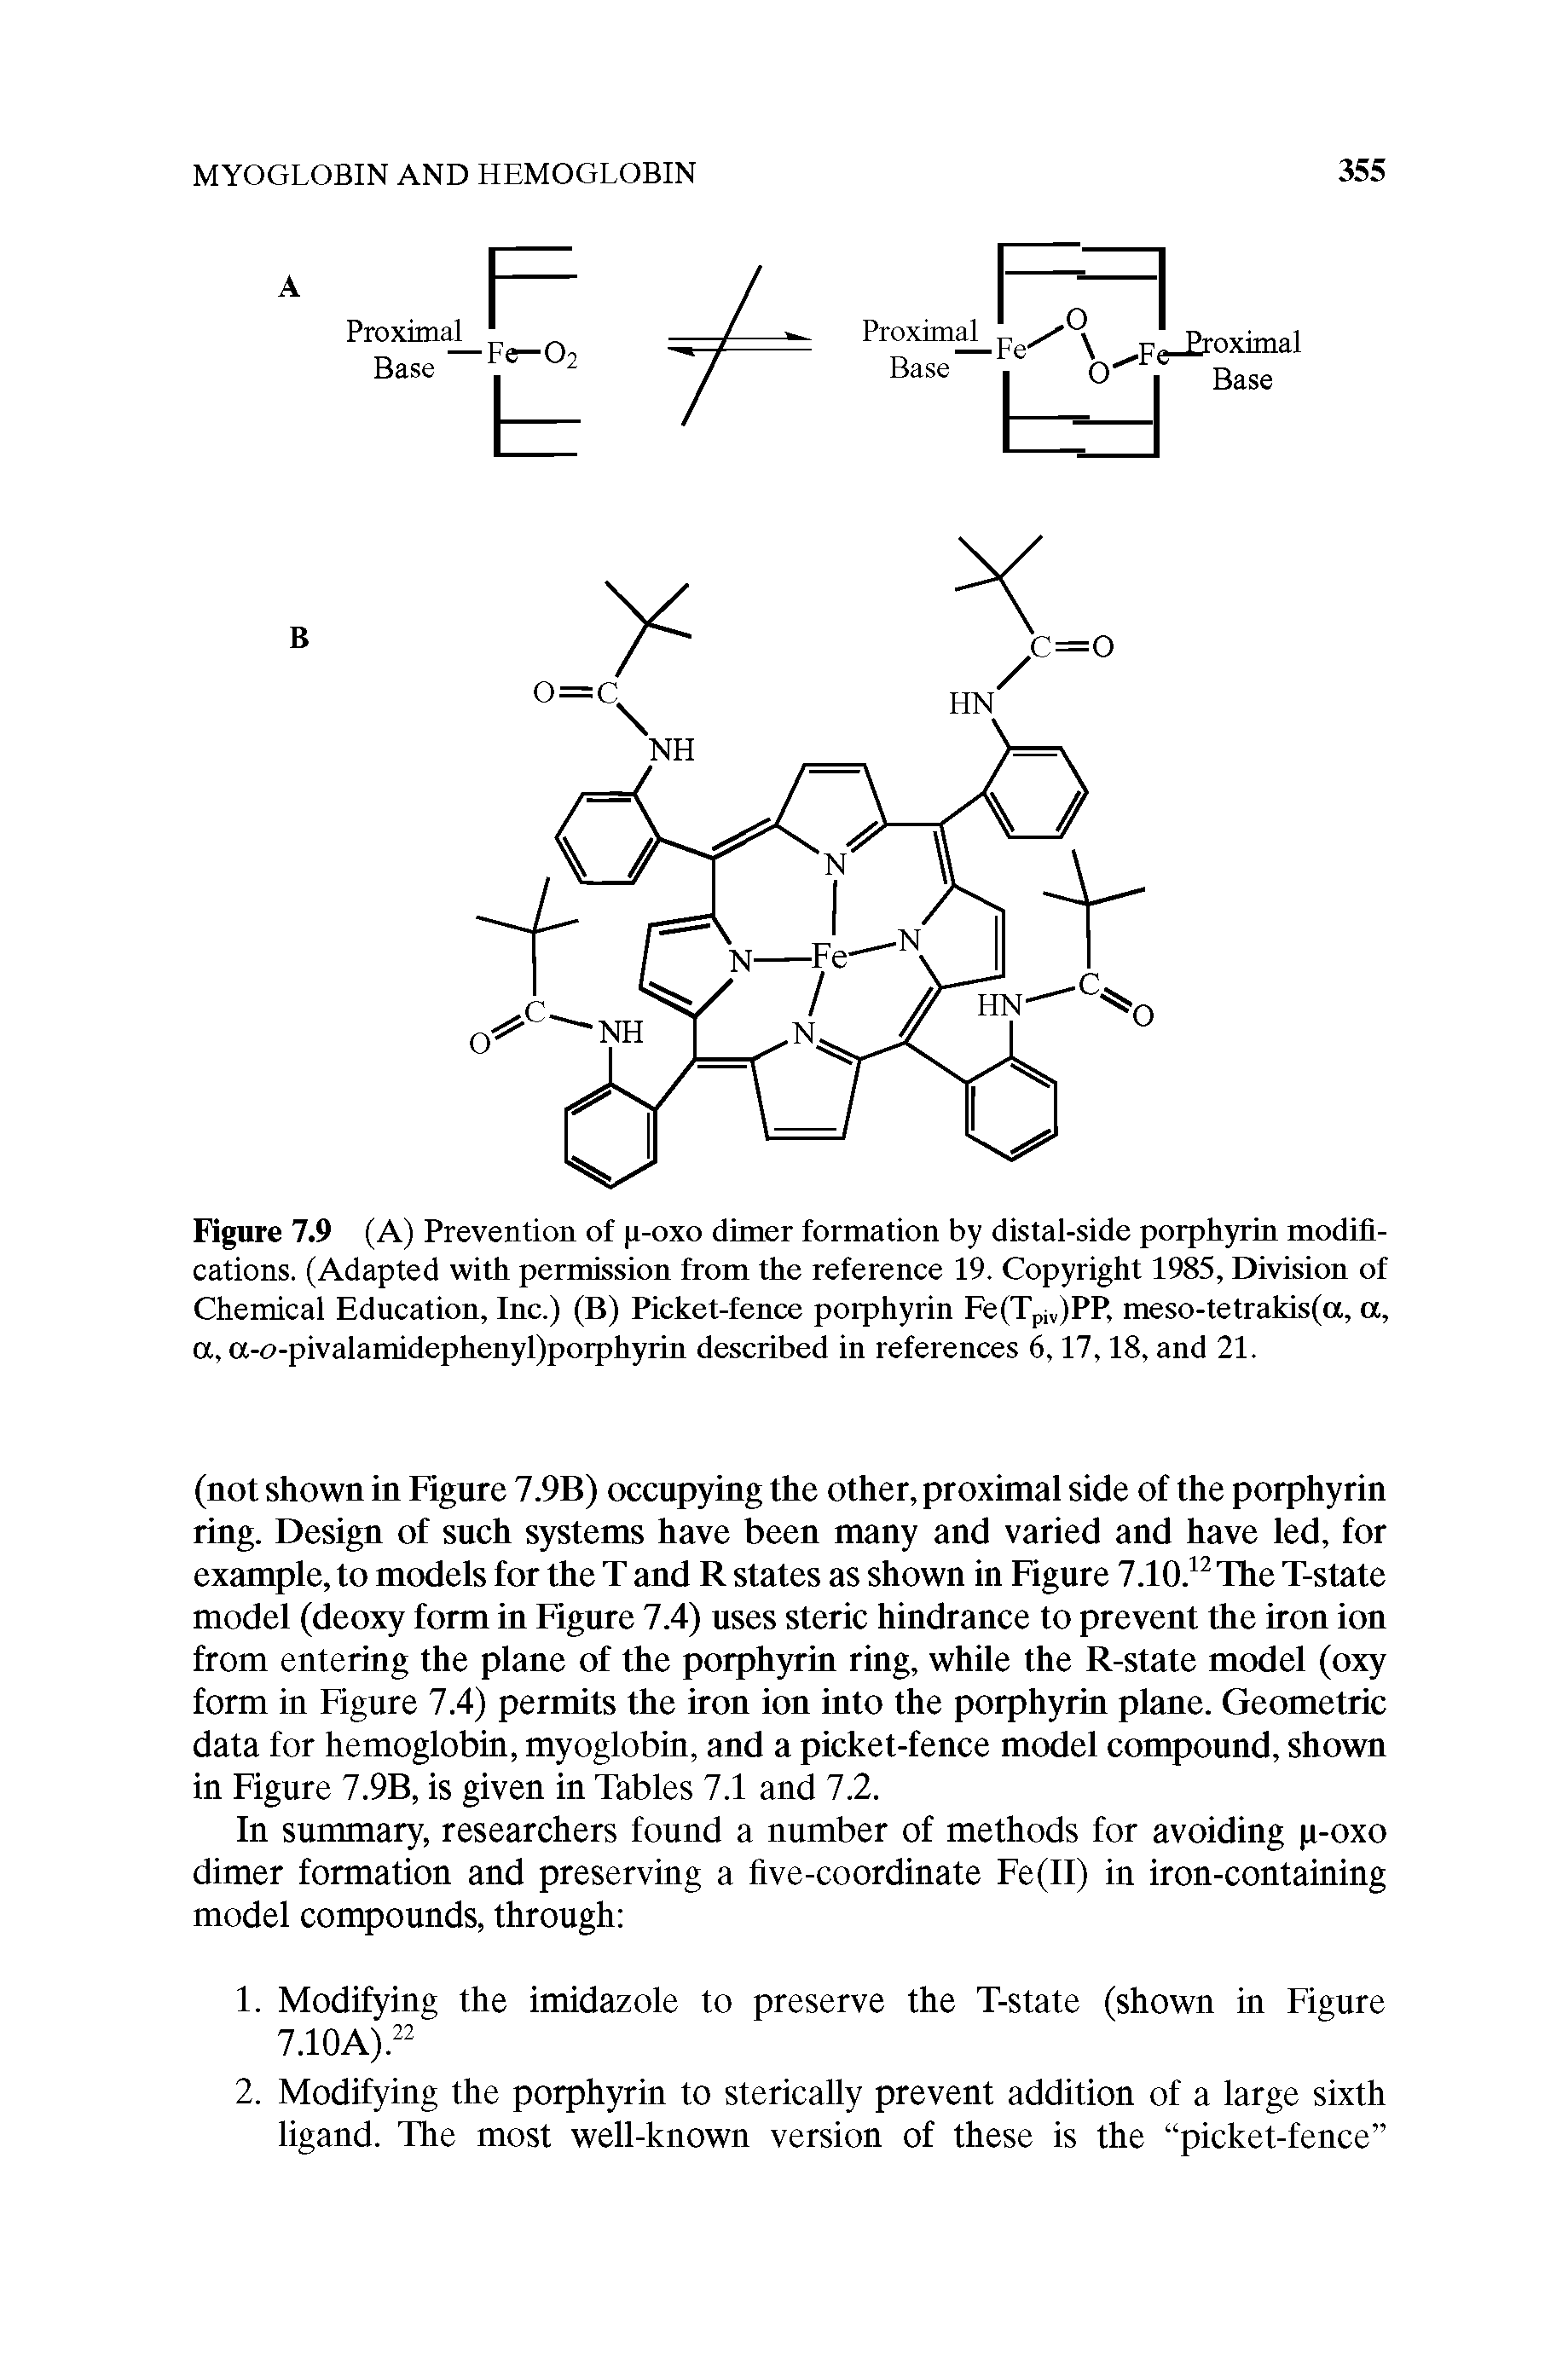 Figure 7.9 (A) Prevention of a-oxo dimer formation by distal-side porphyrin modifications. (Adapted with permission from the reference 19. Copyright 1985, Division of Chemical Edncation, Inc.) (B) Picket-fence porphyrin Fe(Tpjv)PP, meso-tetrakis(a, a, a, a-c>-pivalamidephenyl)porphyrin described in references 6,17,18, and 21.